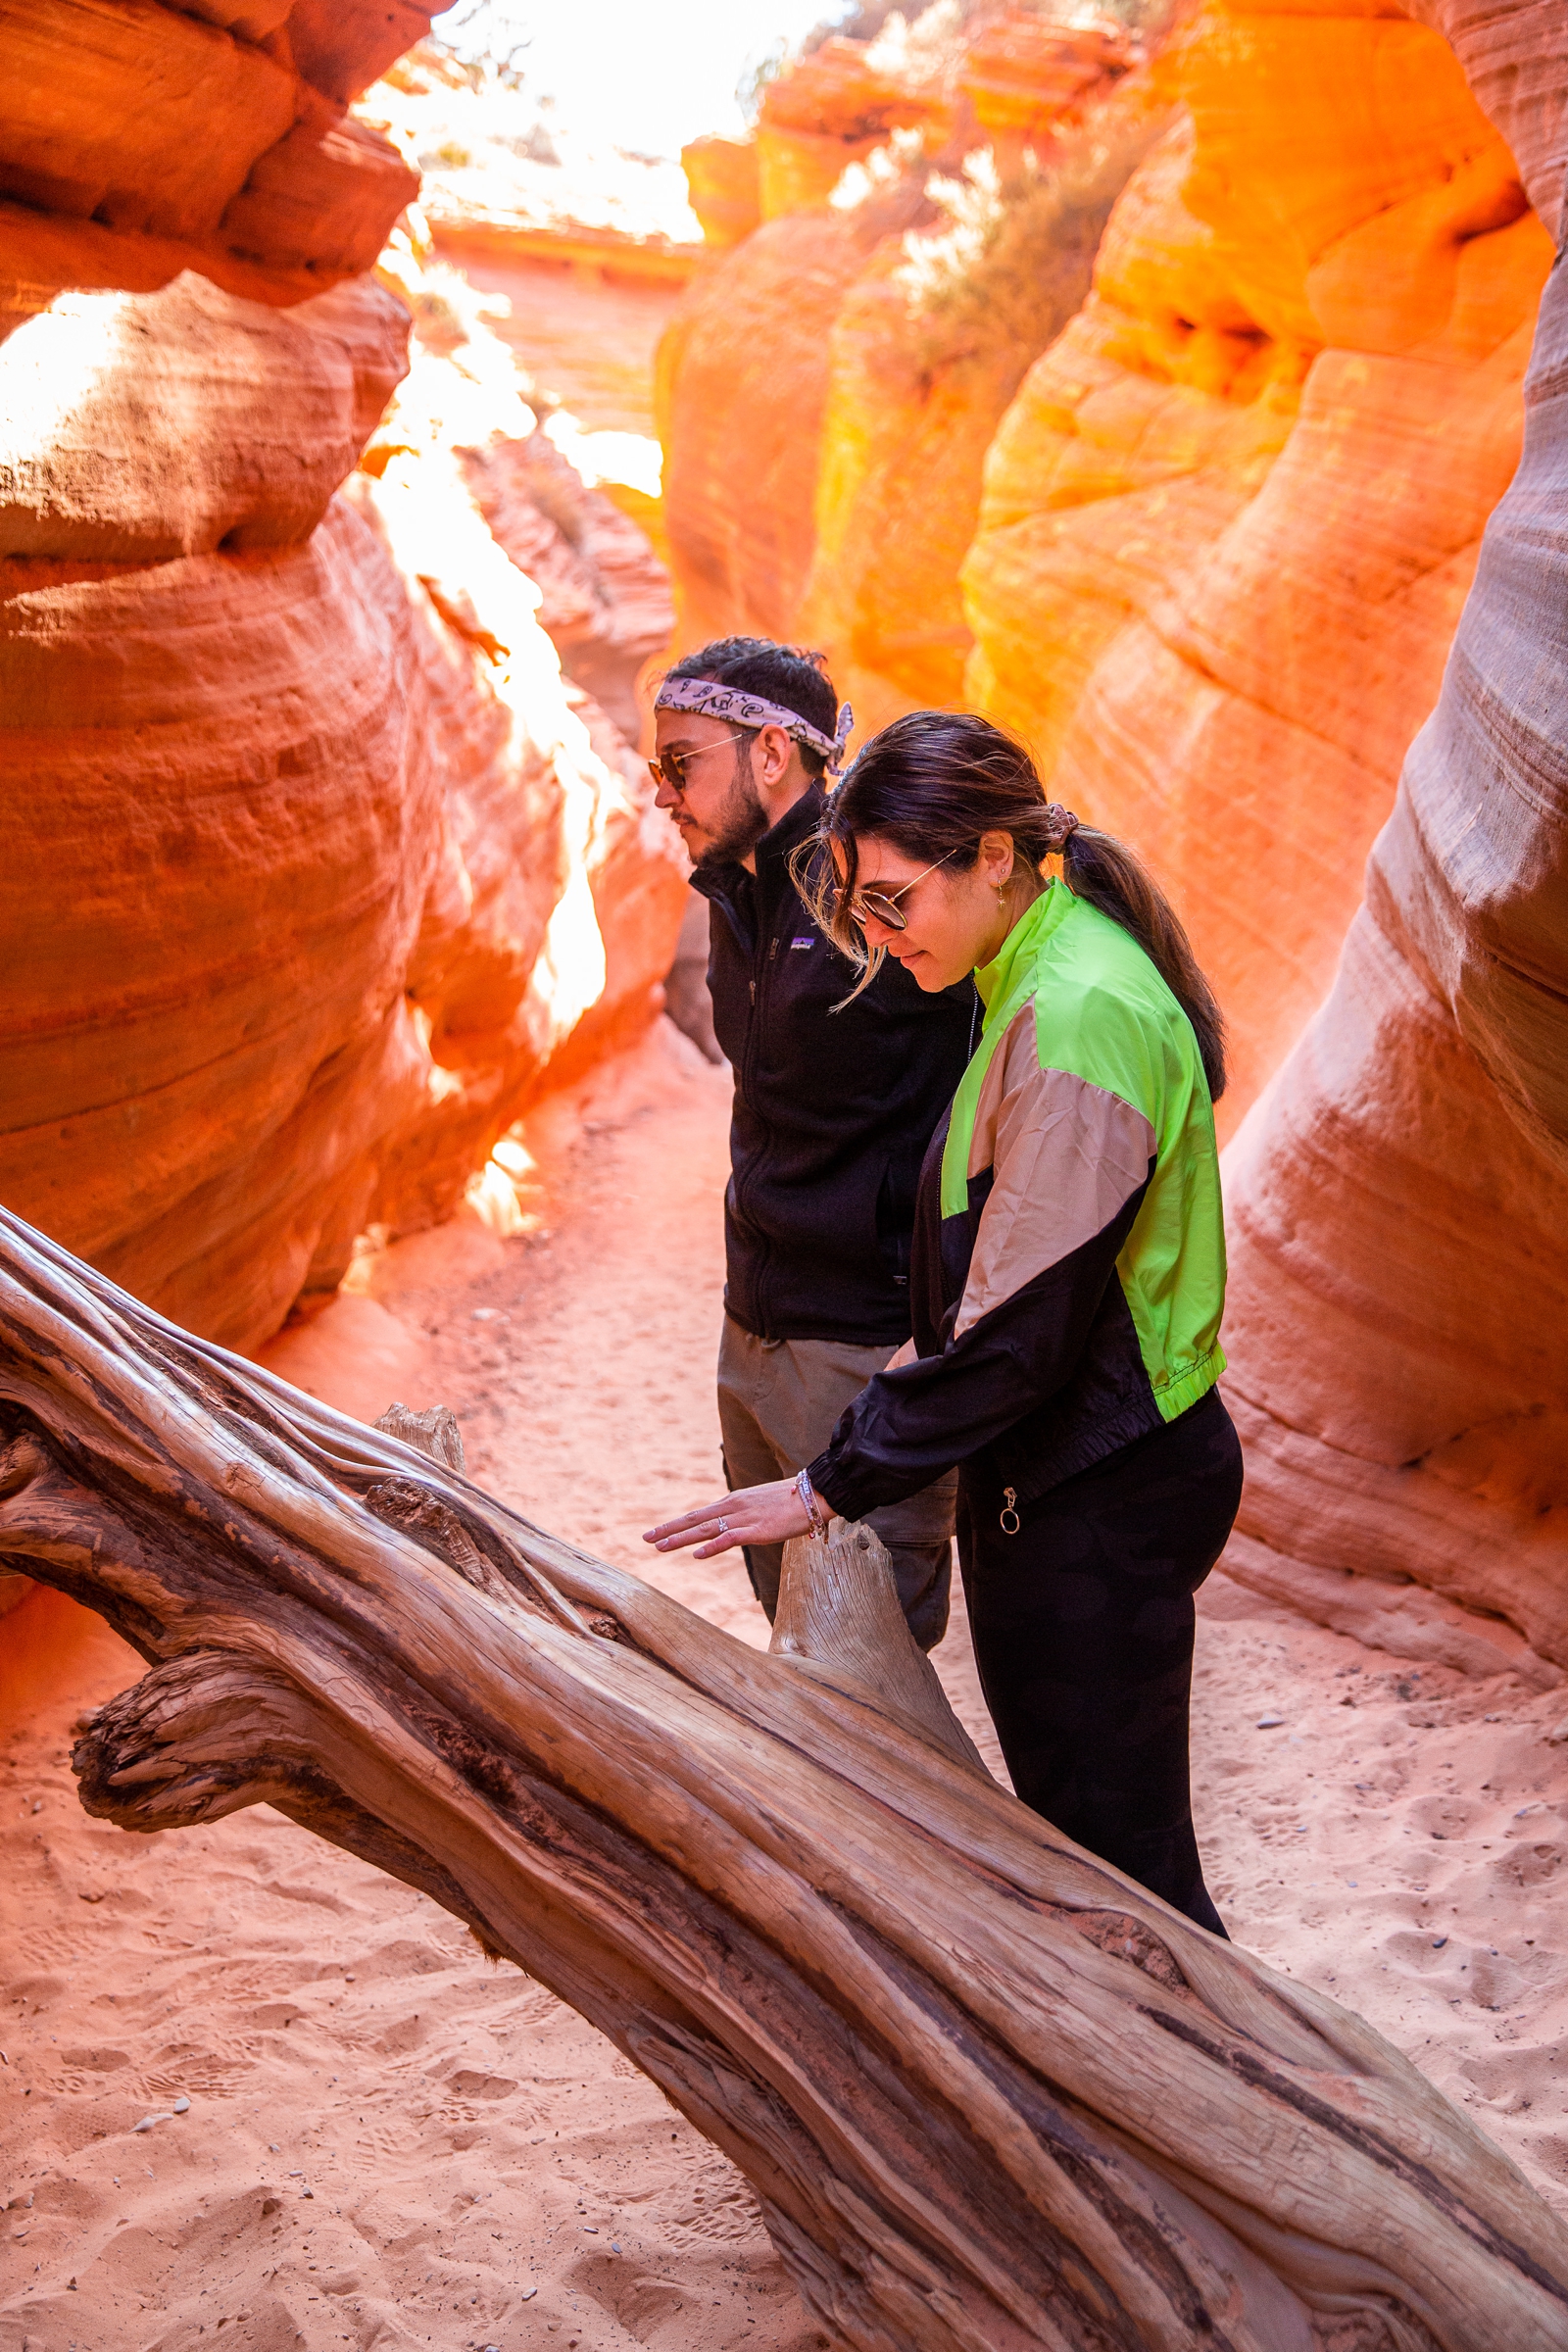 A newly engaged couple admiring the tree in the Utah slot canyon